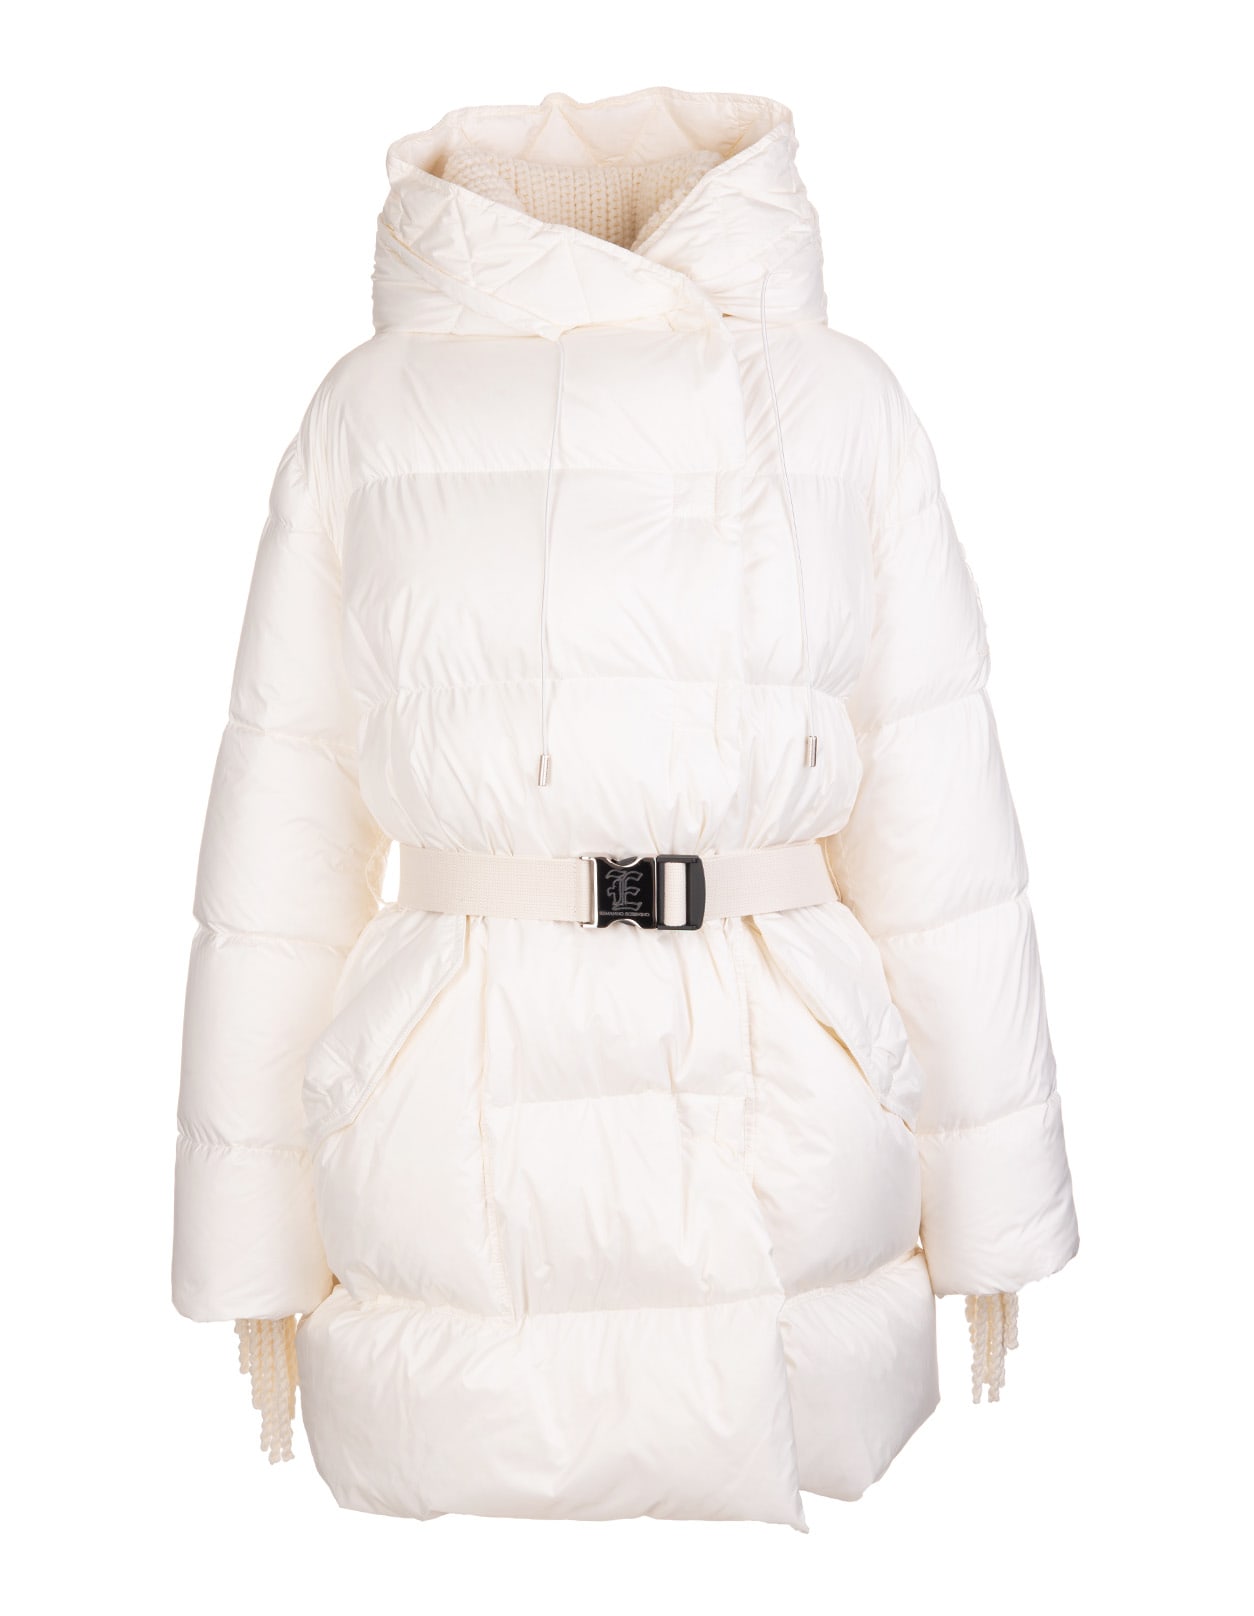 Ermanno Scervino White Down Jacket With Belt And Sleeve With Concealed Fringes